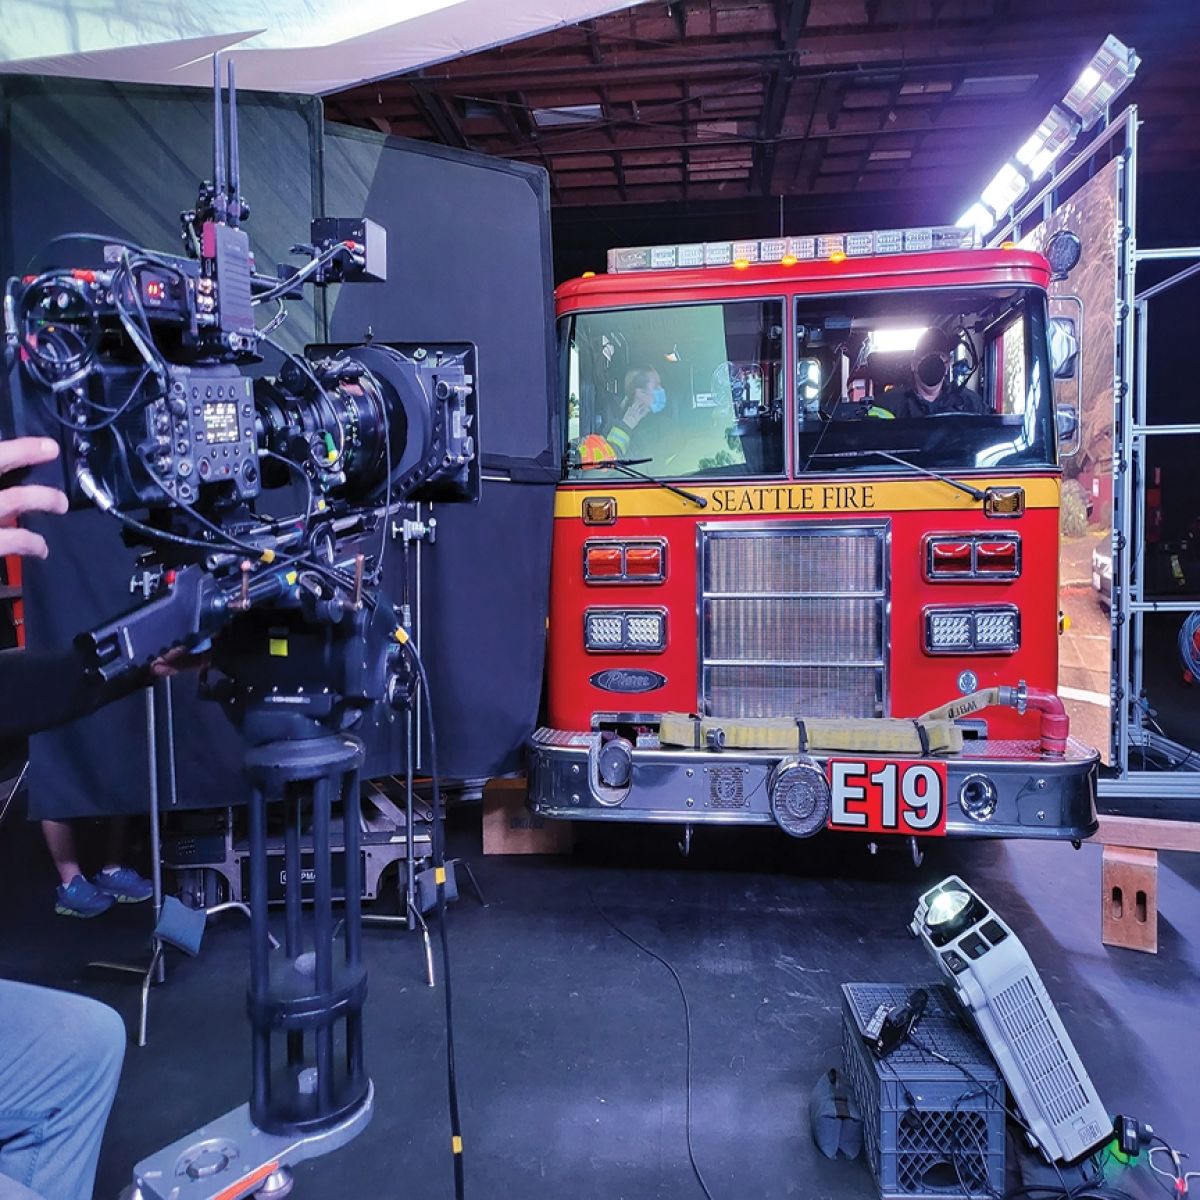 The ABC series Station 19 has adopted in-camera visual effects for driving scenes, with the aid of LED-wall and virtual-production systems at Stargate Studios. (Photo courtesy of Sam Nicholson, ASC.)